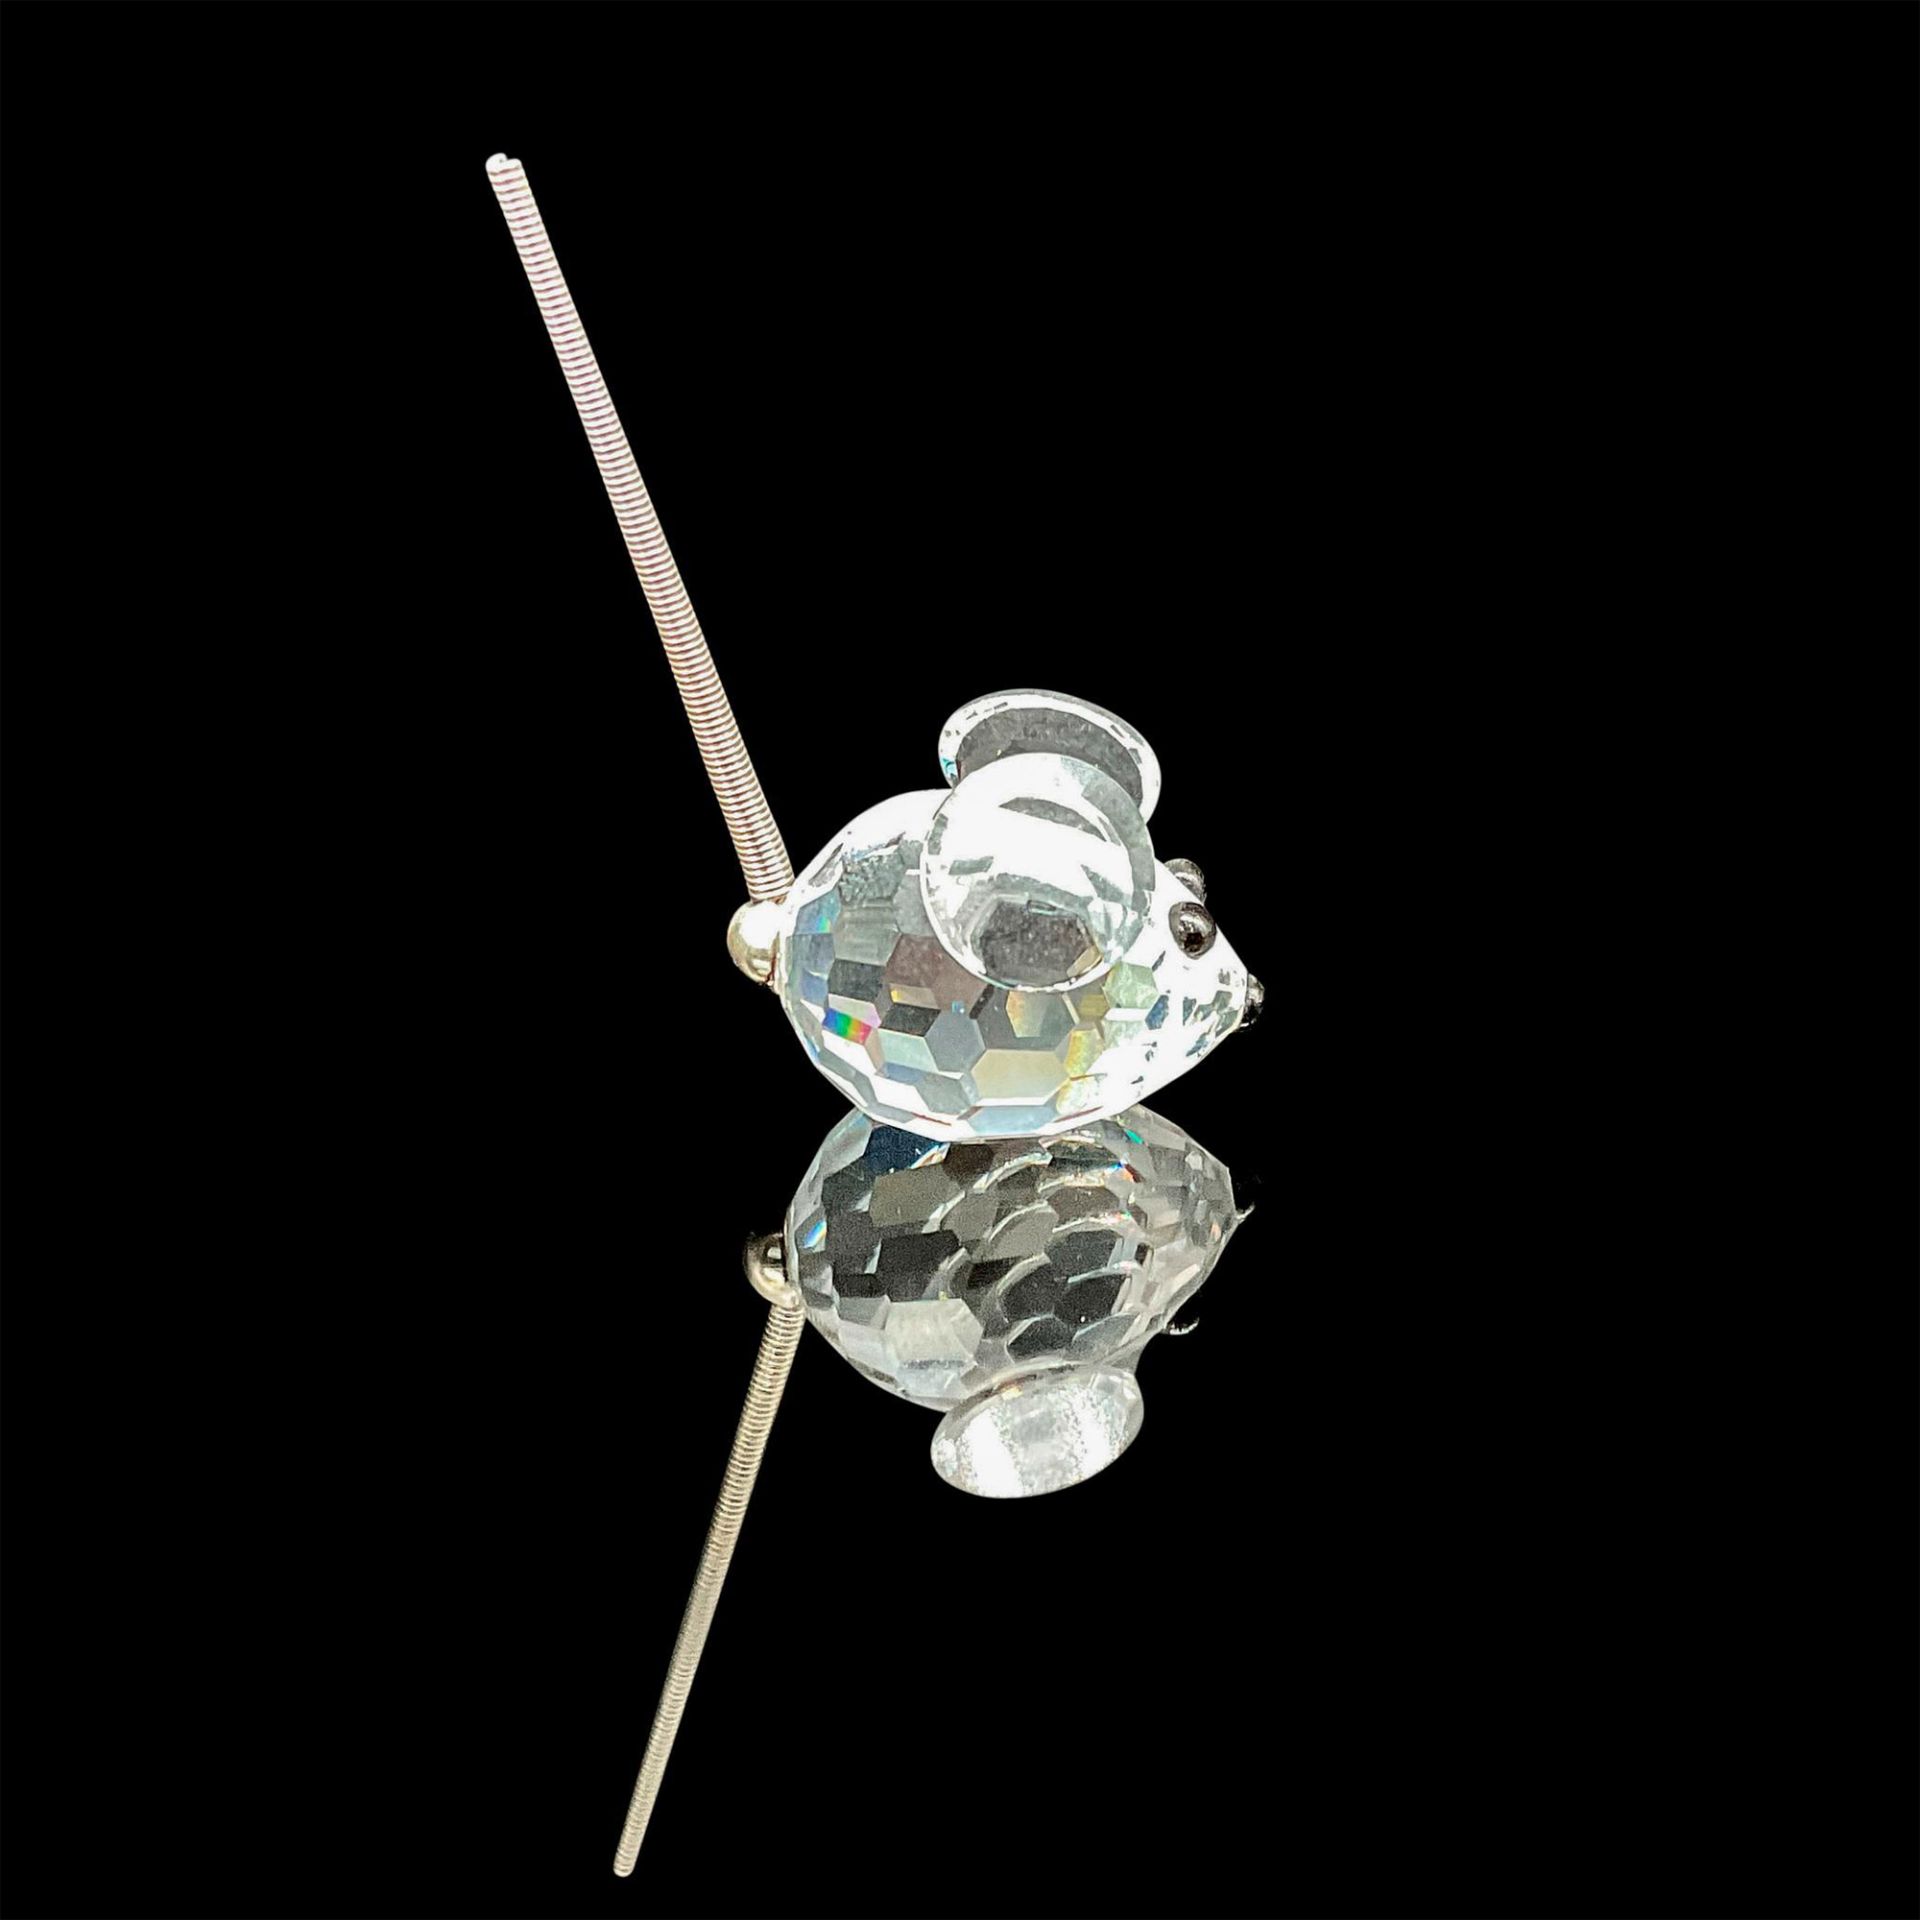 Swarovski Crystal Figurine, Mouse with Long Wire Tail - Image 2 of 3